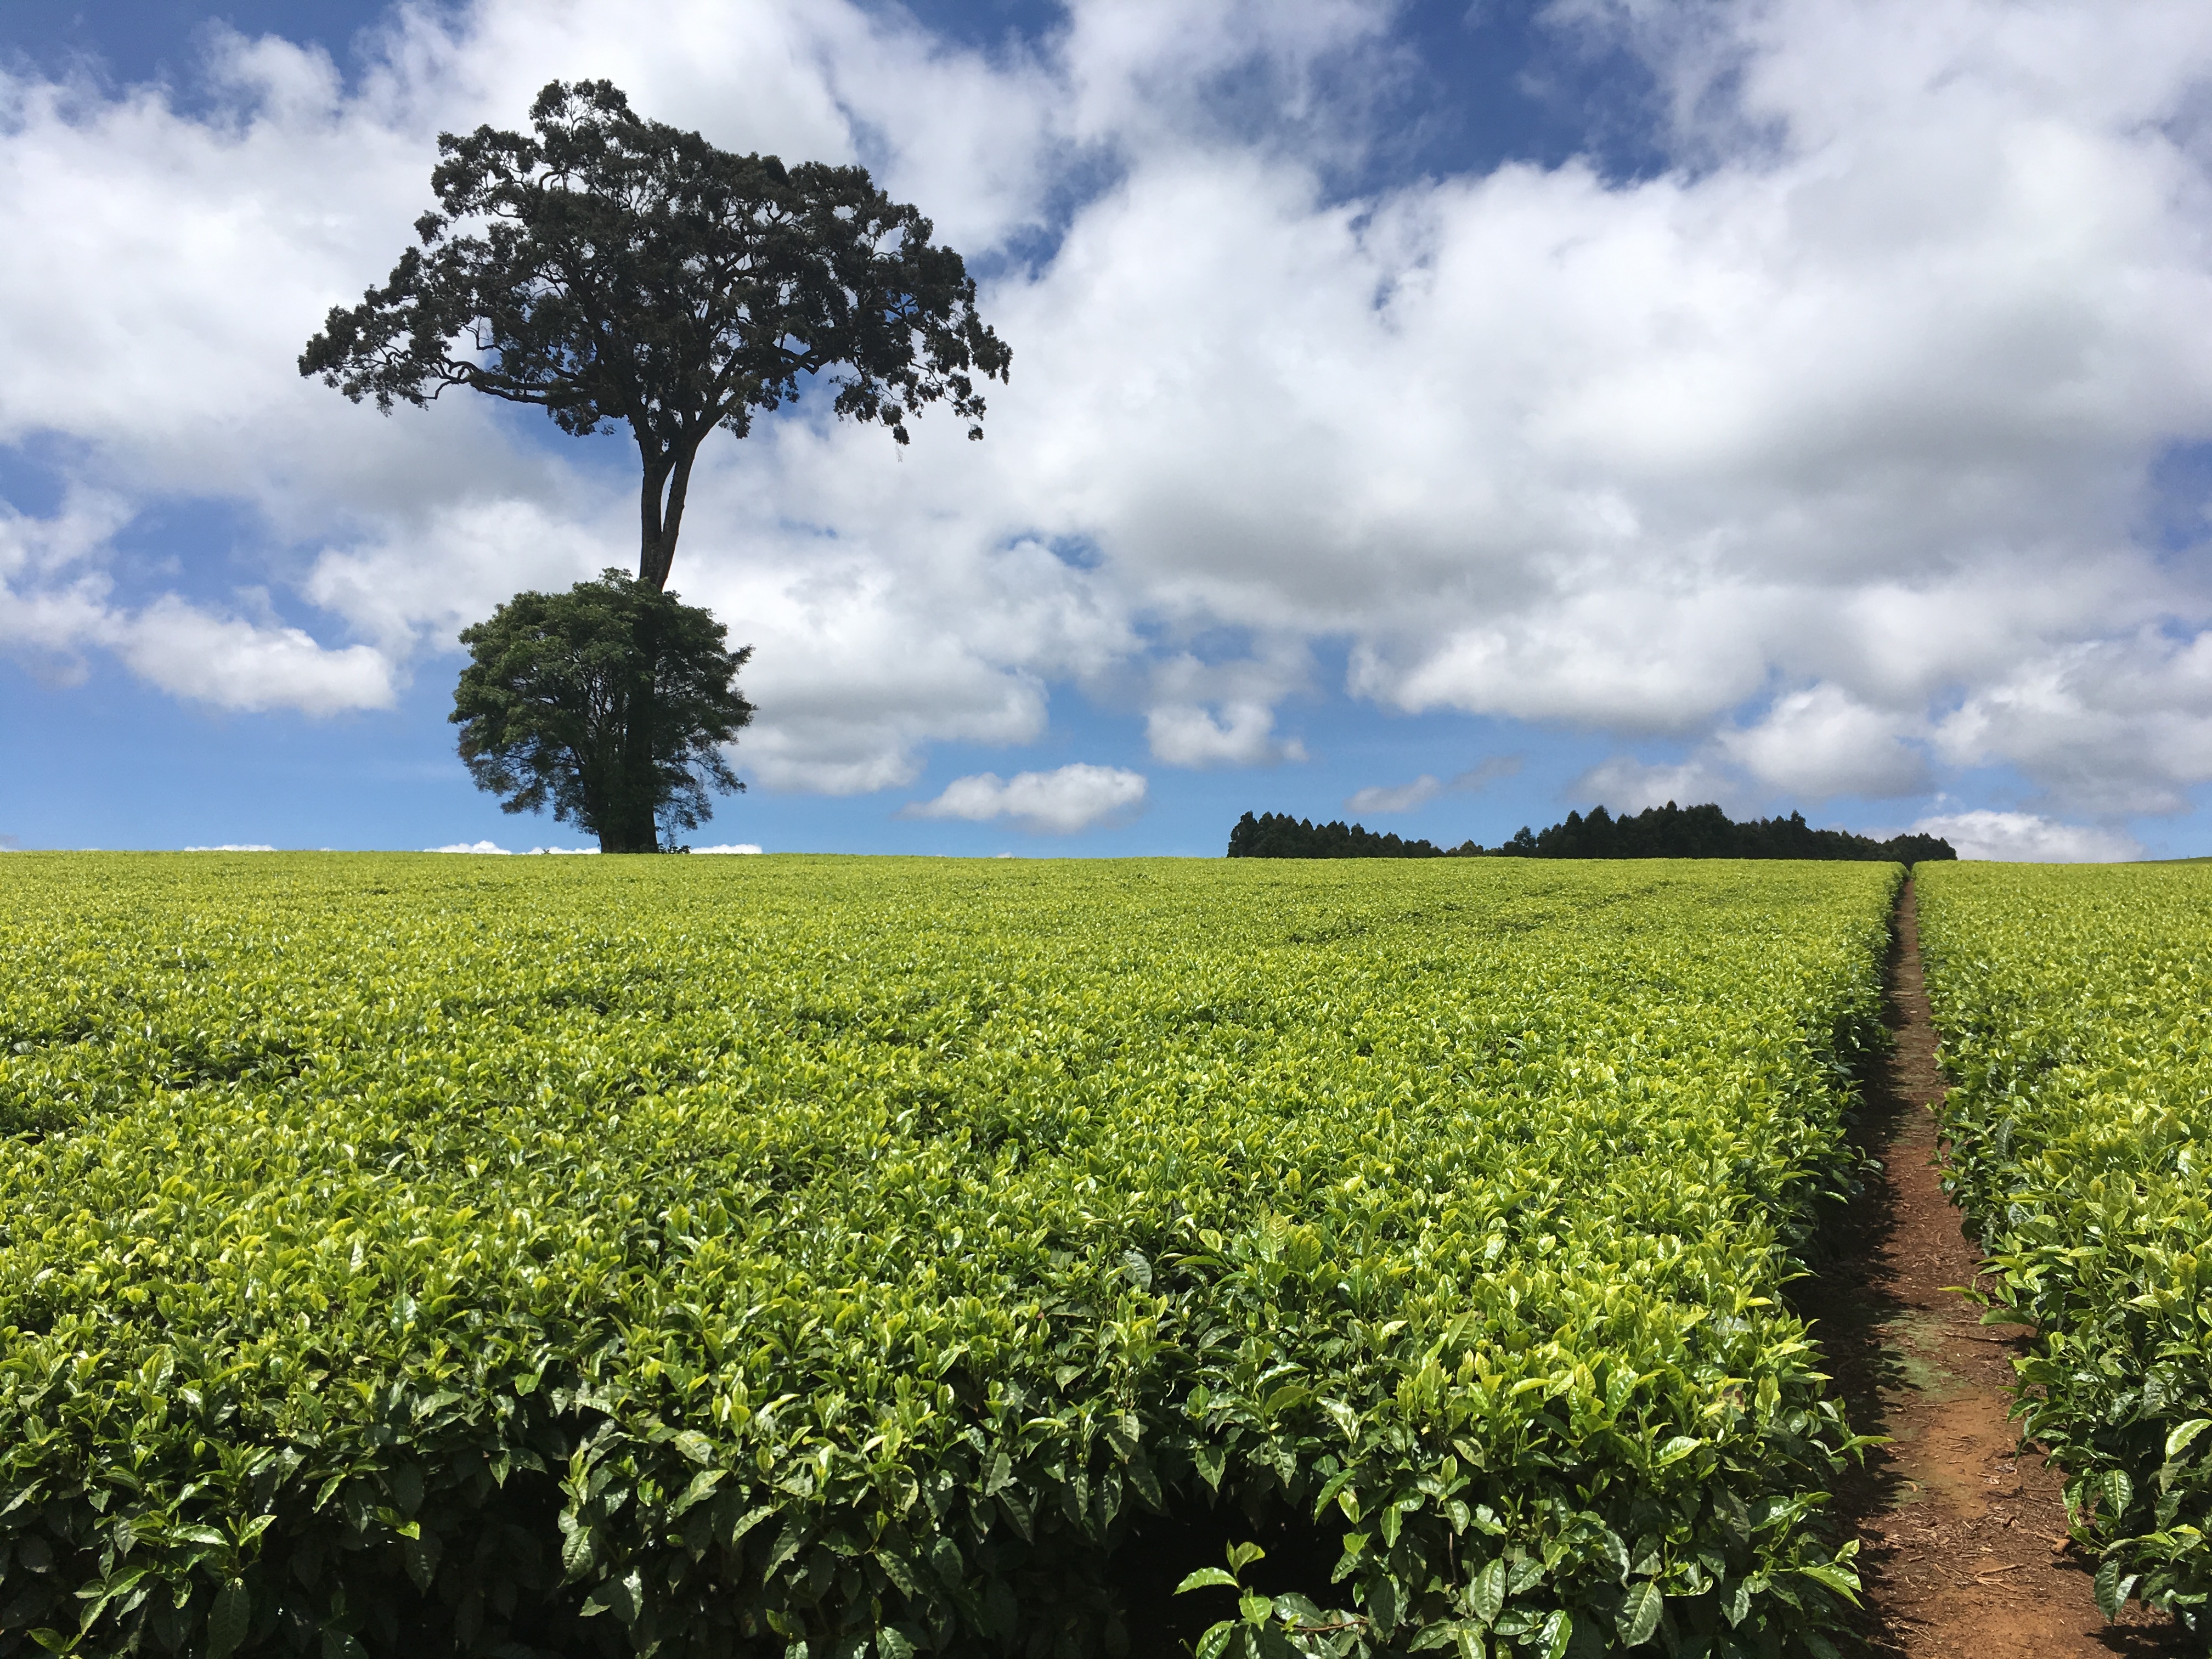 The Mabroukie tea plantation in Limuru, central Kenya. Established in 1924 by Brooke Bond Kenya (later Unilever Kenya), Mabroukie was the Kenyan colony’s first large-scale tea plantation replete with its own factory. While large, multinational tea plantations dominate the landscape west of Kenya’s Rift Valley, Mabroukie today is the only multinational-owned tea plantation east of the Rift. (Photo credit: Elliott, 2018)